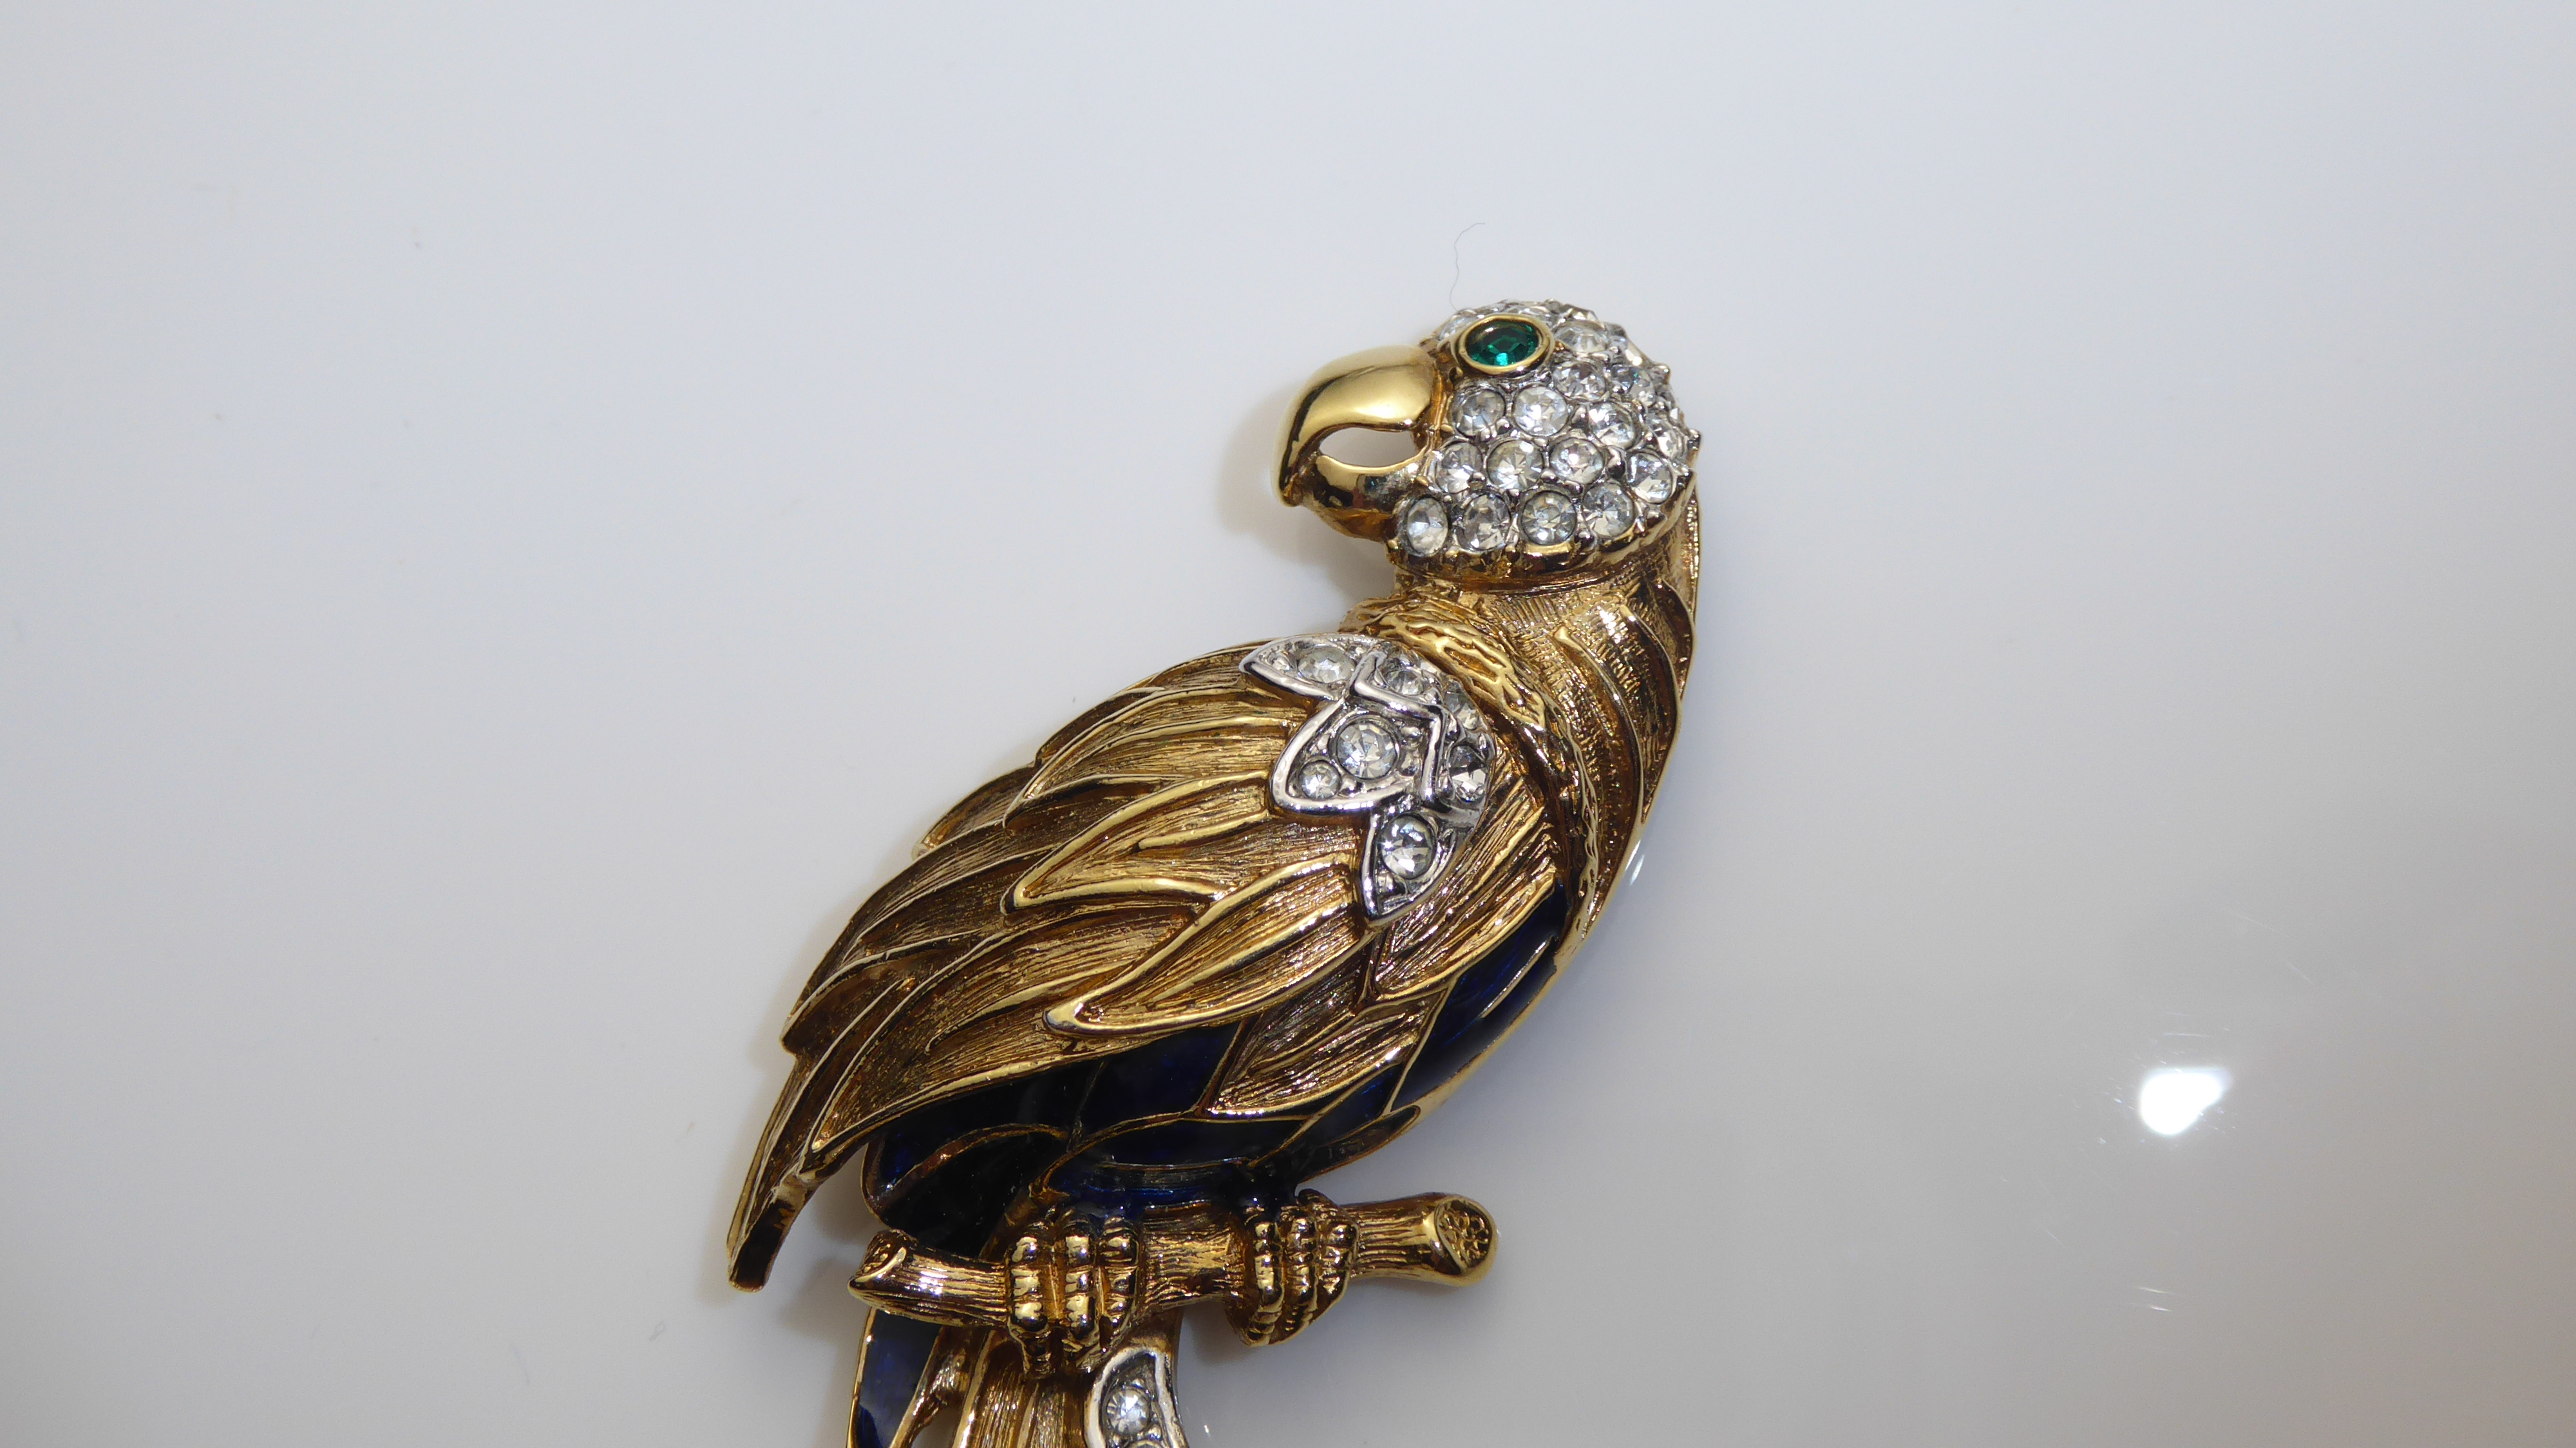 A 20TH CENTURY GOLD PLATED, ENAMEL AND PASTE SET PARROT BROOCH Perched on a branch with blue - Image 2 of 2